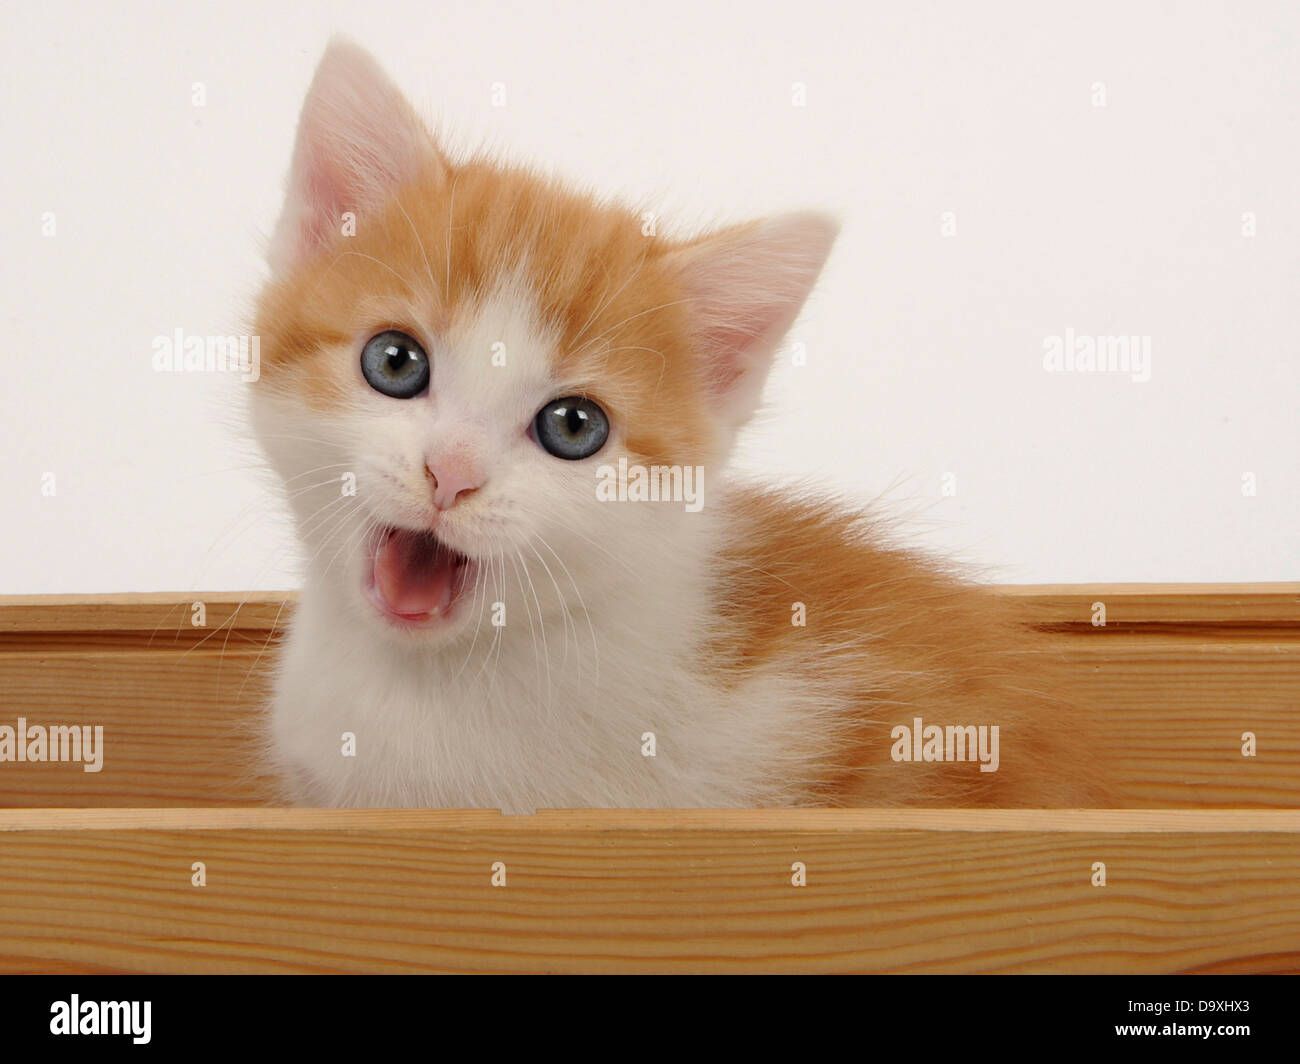 A small cute ginger and white kitten taking and chatting. Stock Photo